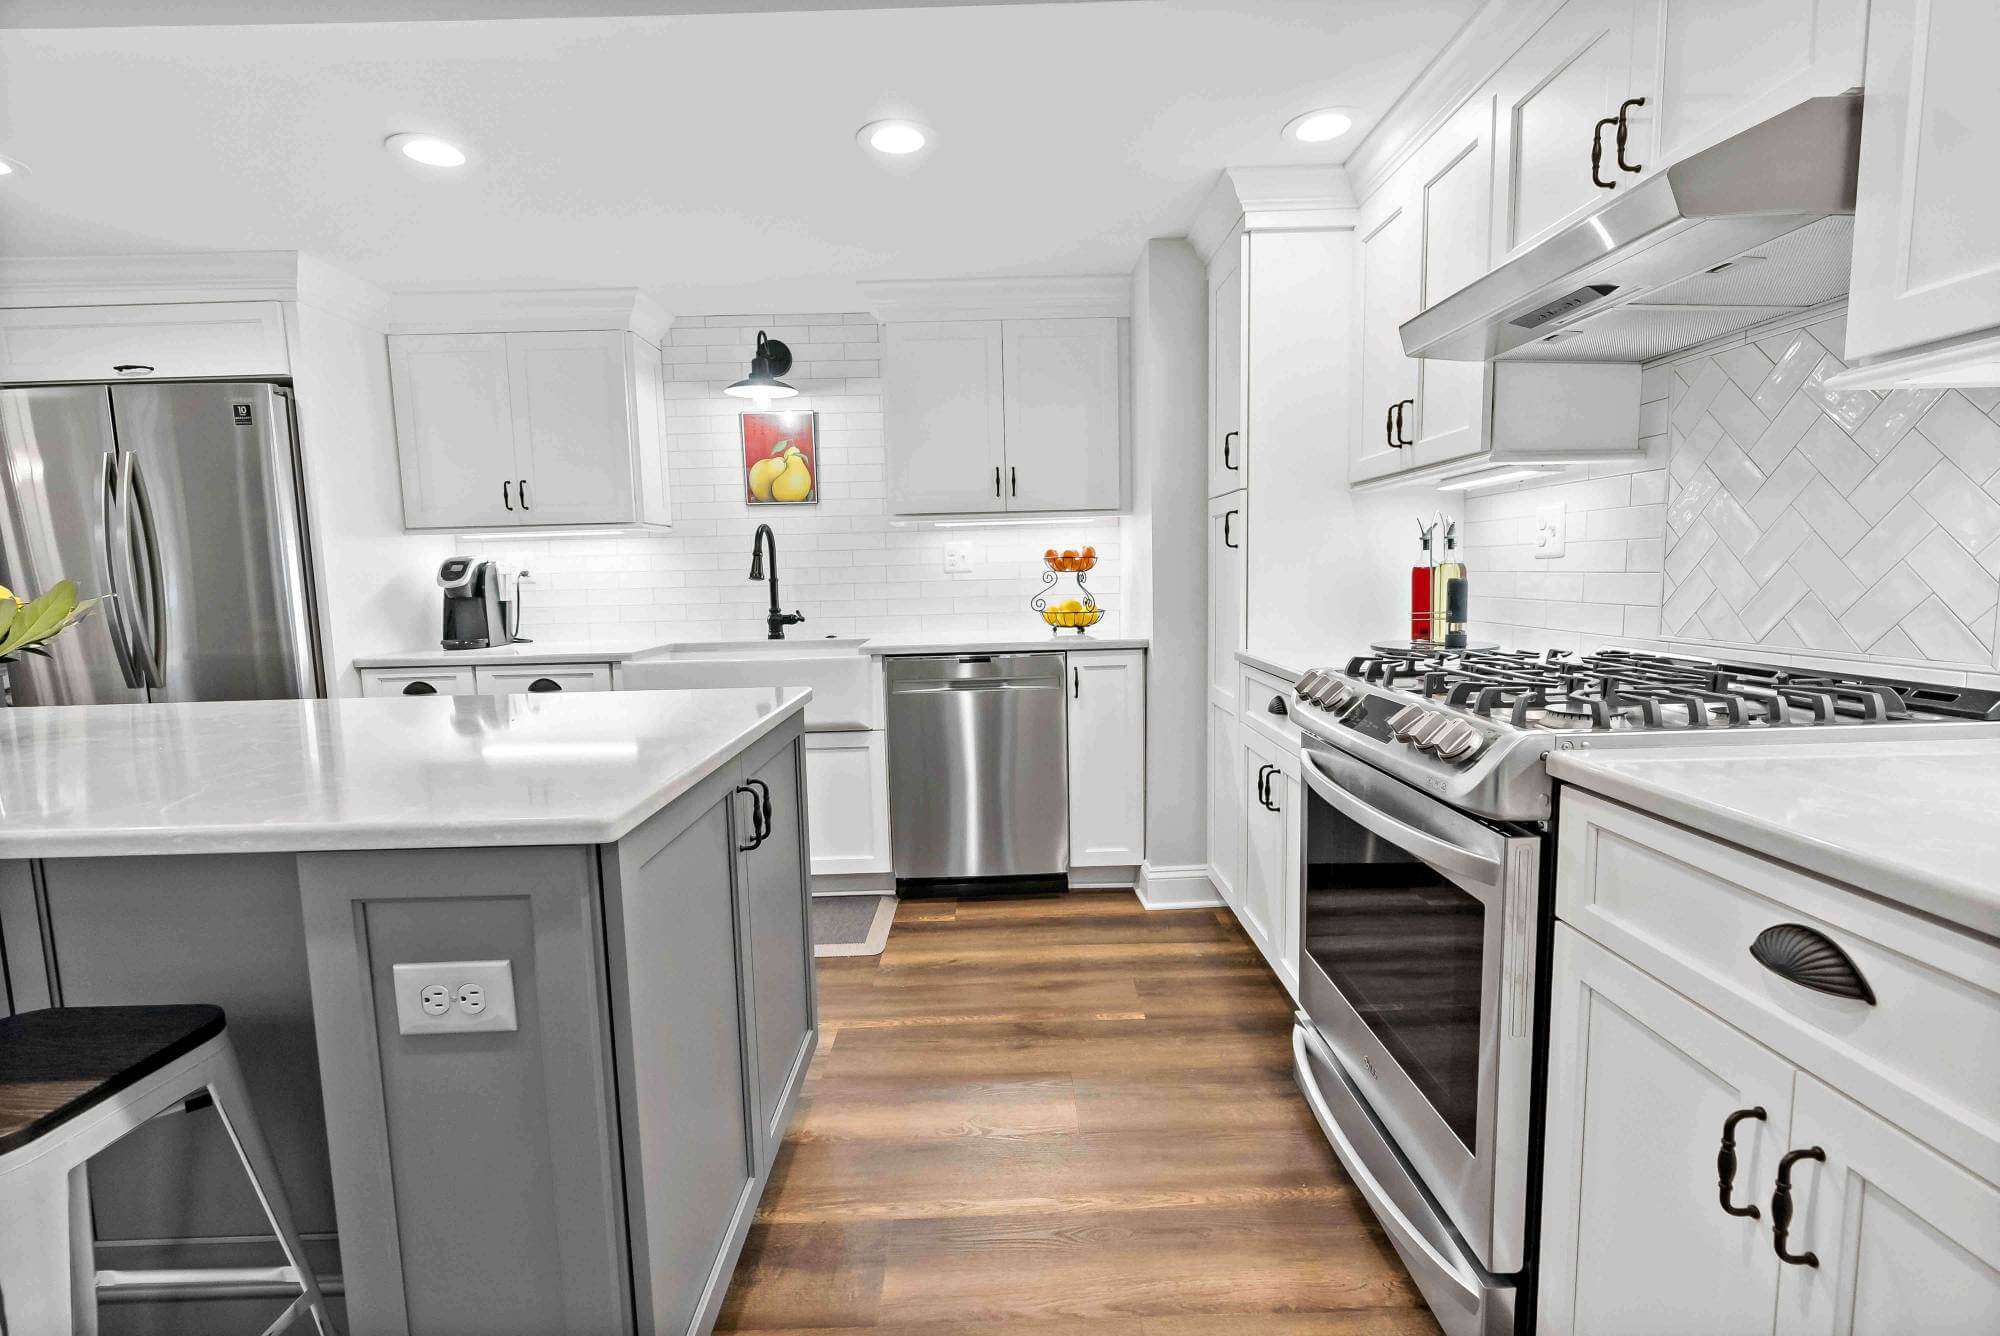 White cabinets with black handles in kitchen